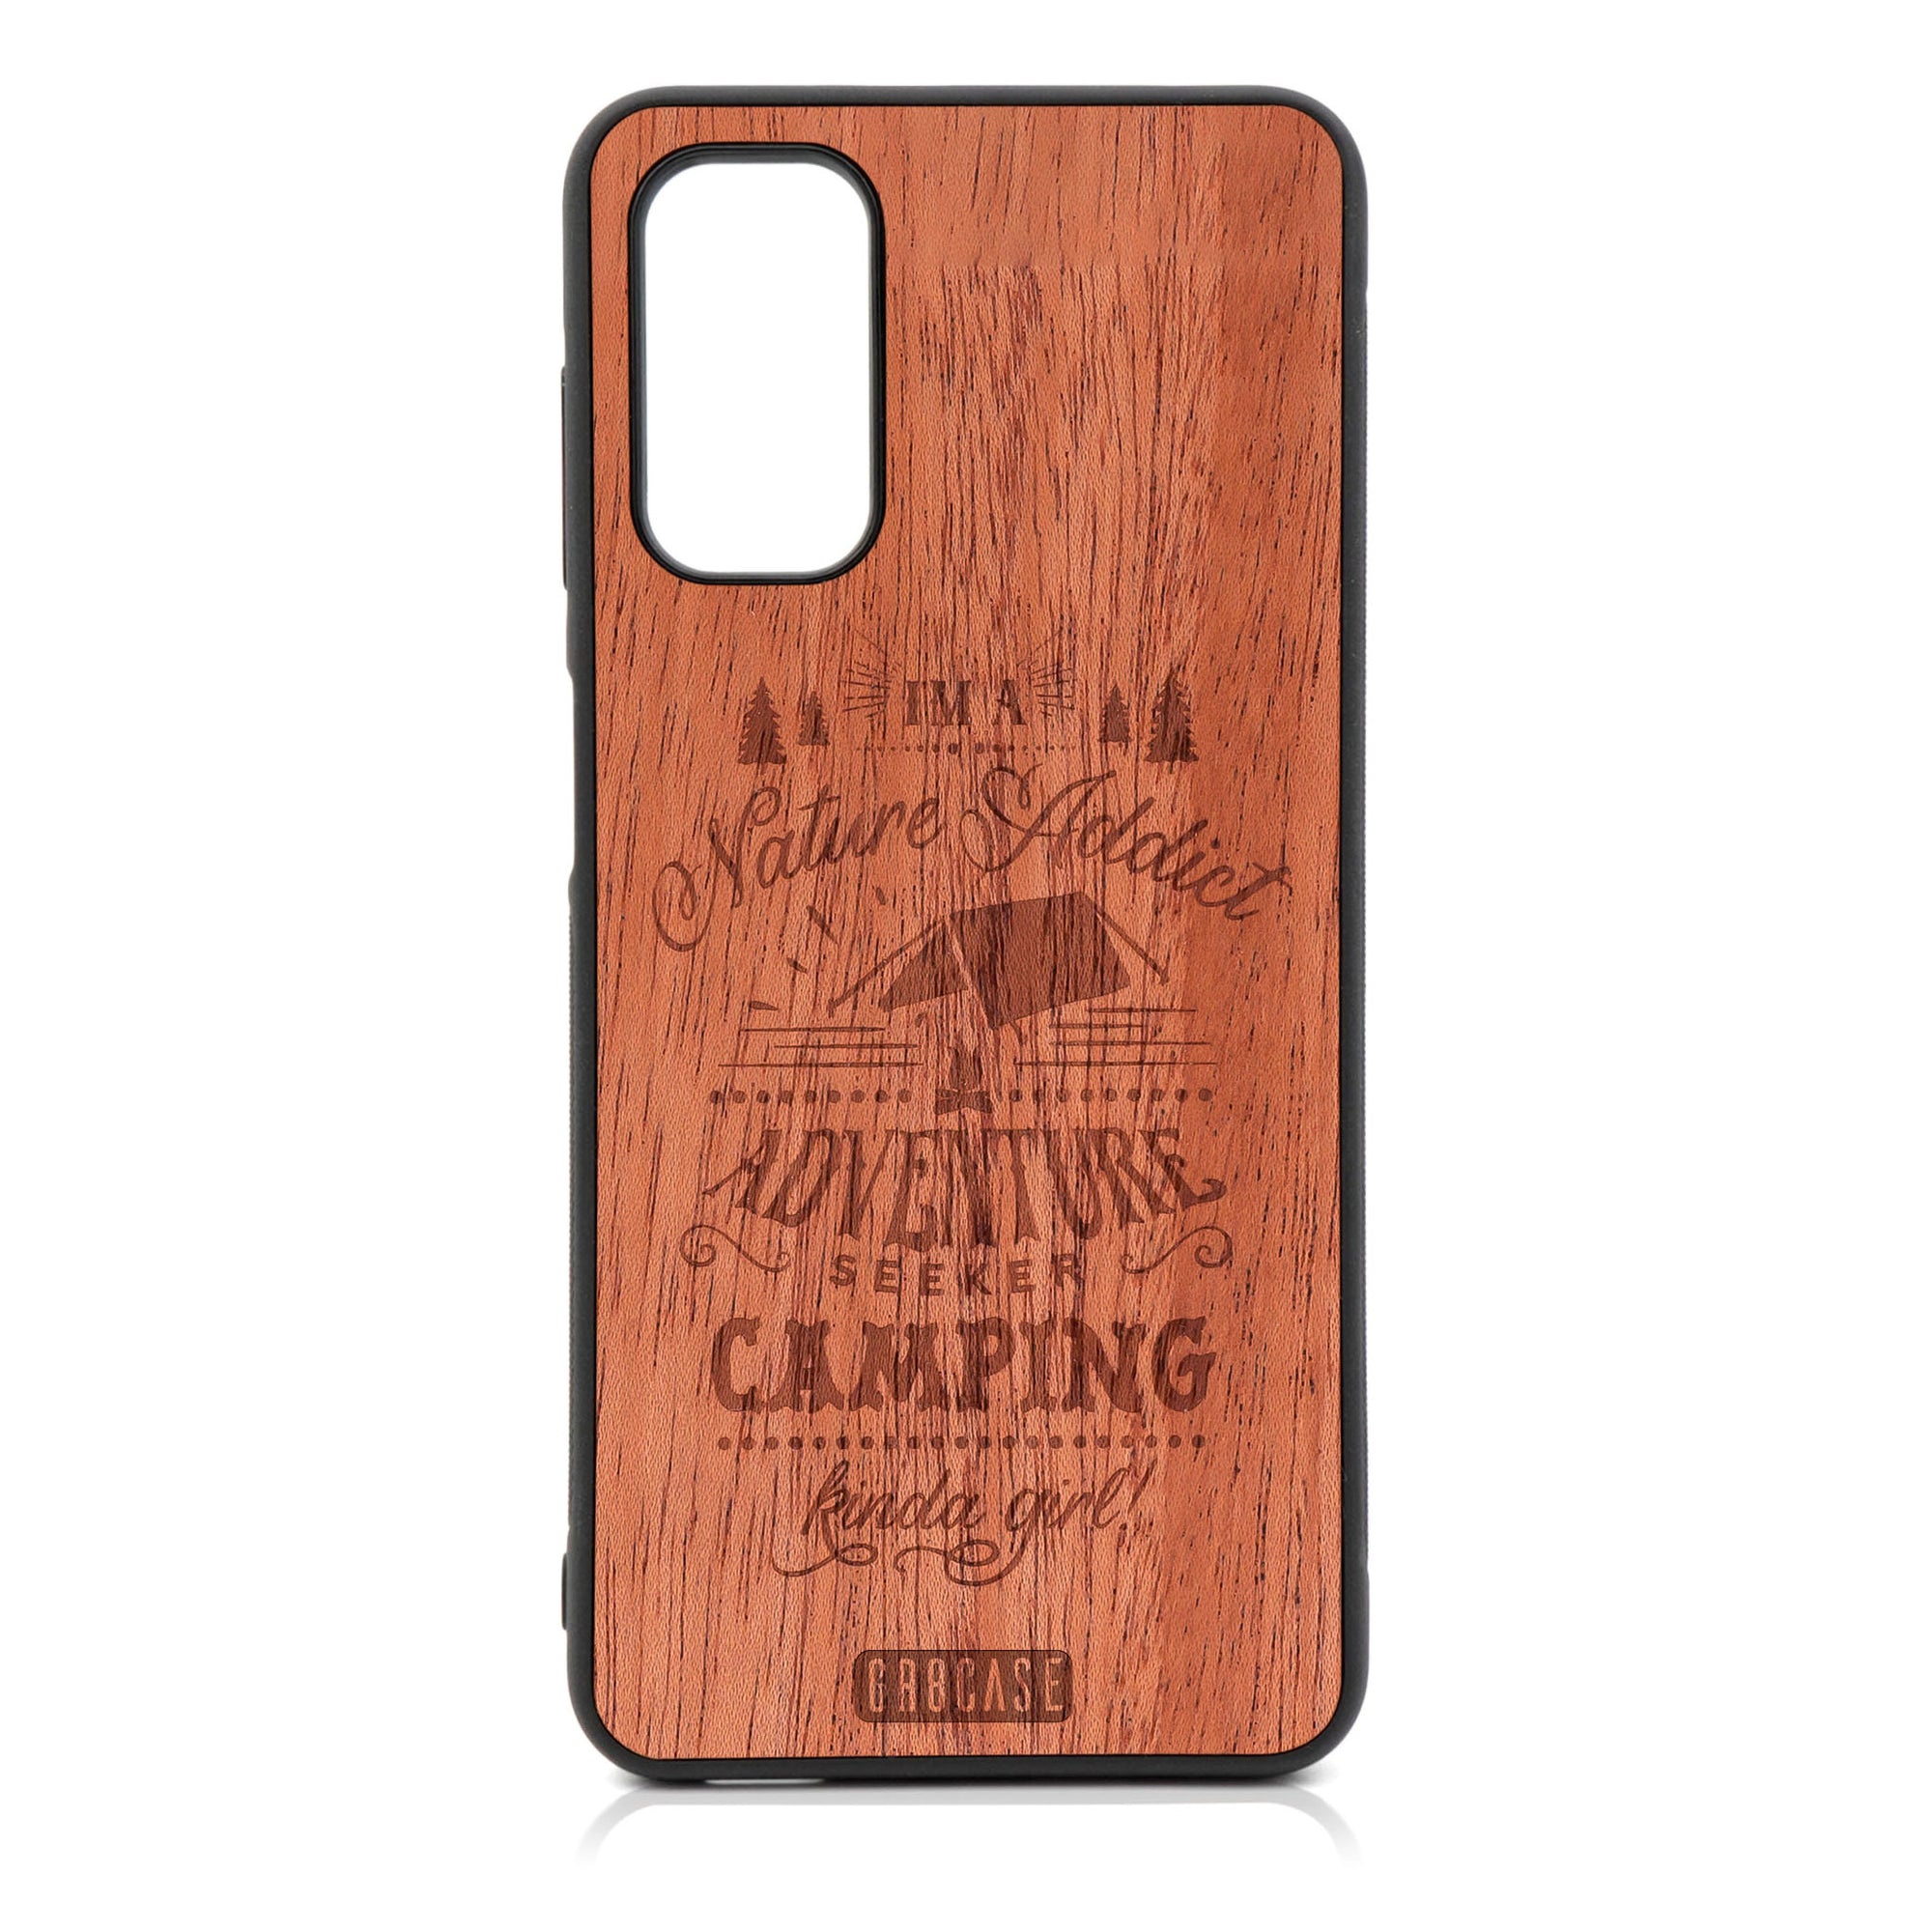 I'm A Nature Addict Adventure Seeker Camping Kinda Girl Design Wood Case For Galaxy A13 5G